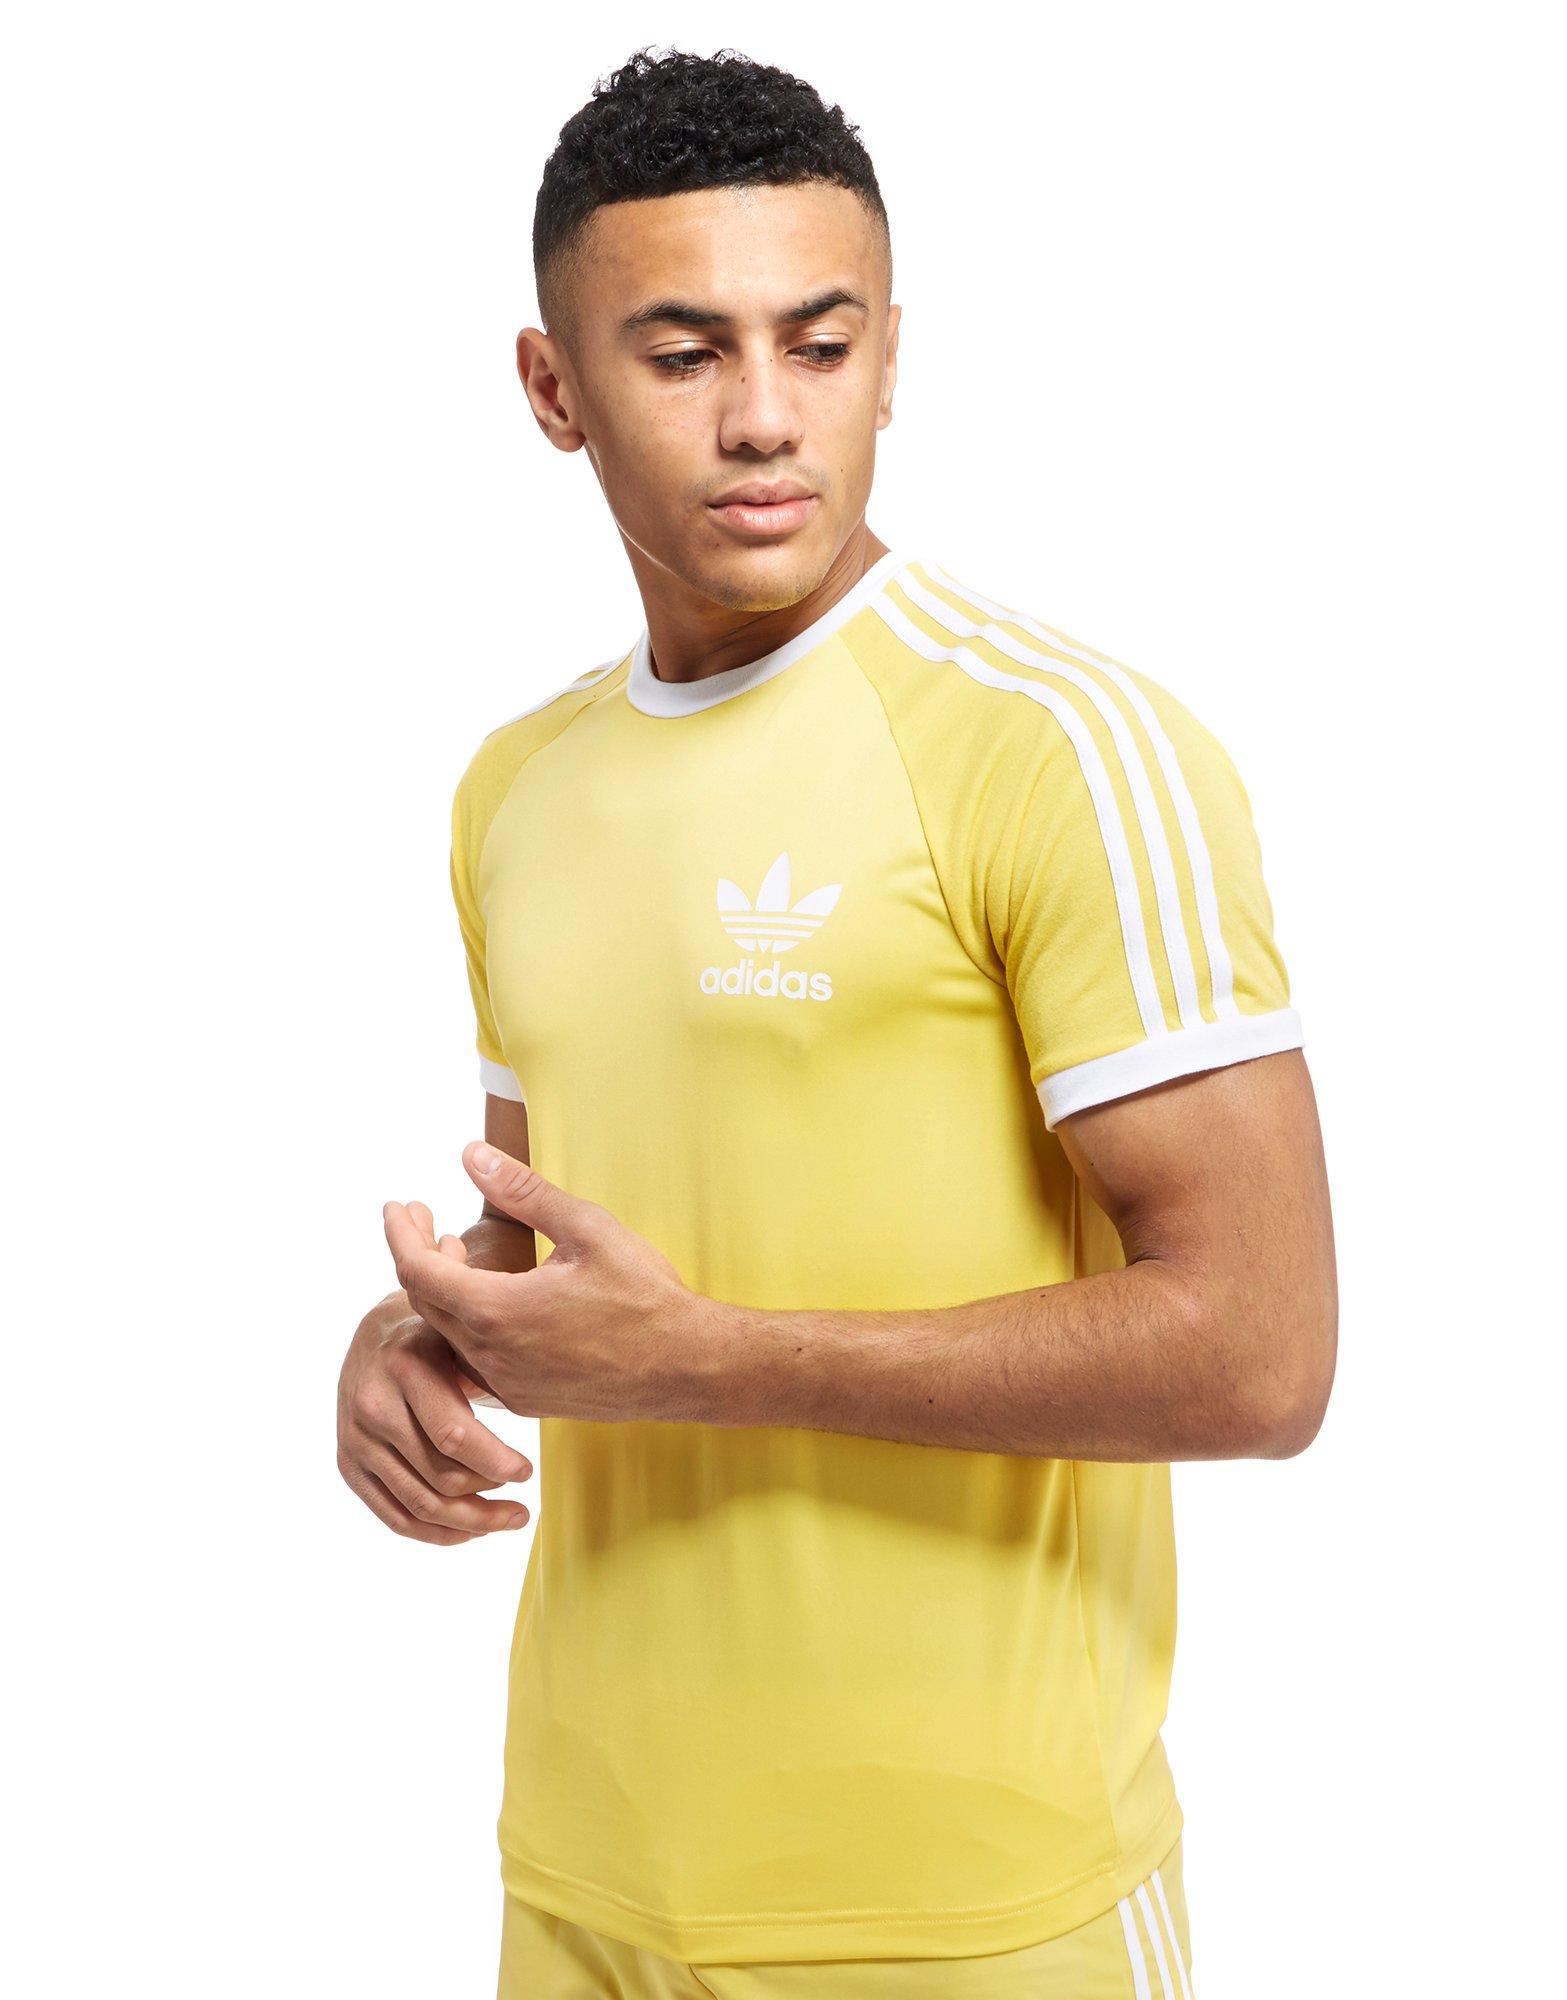 adidas Originals Synthetic California Trefoil T-shirt in Yellow for Men -  Lyst